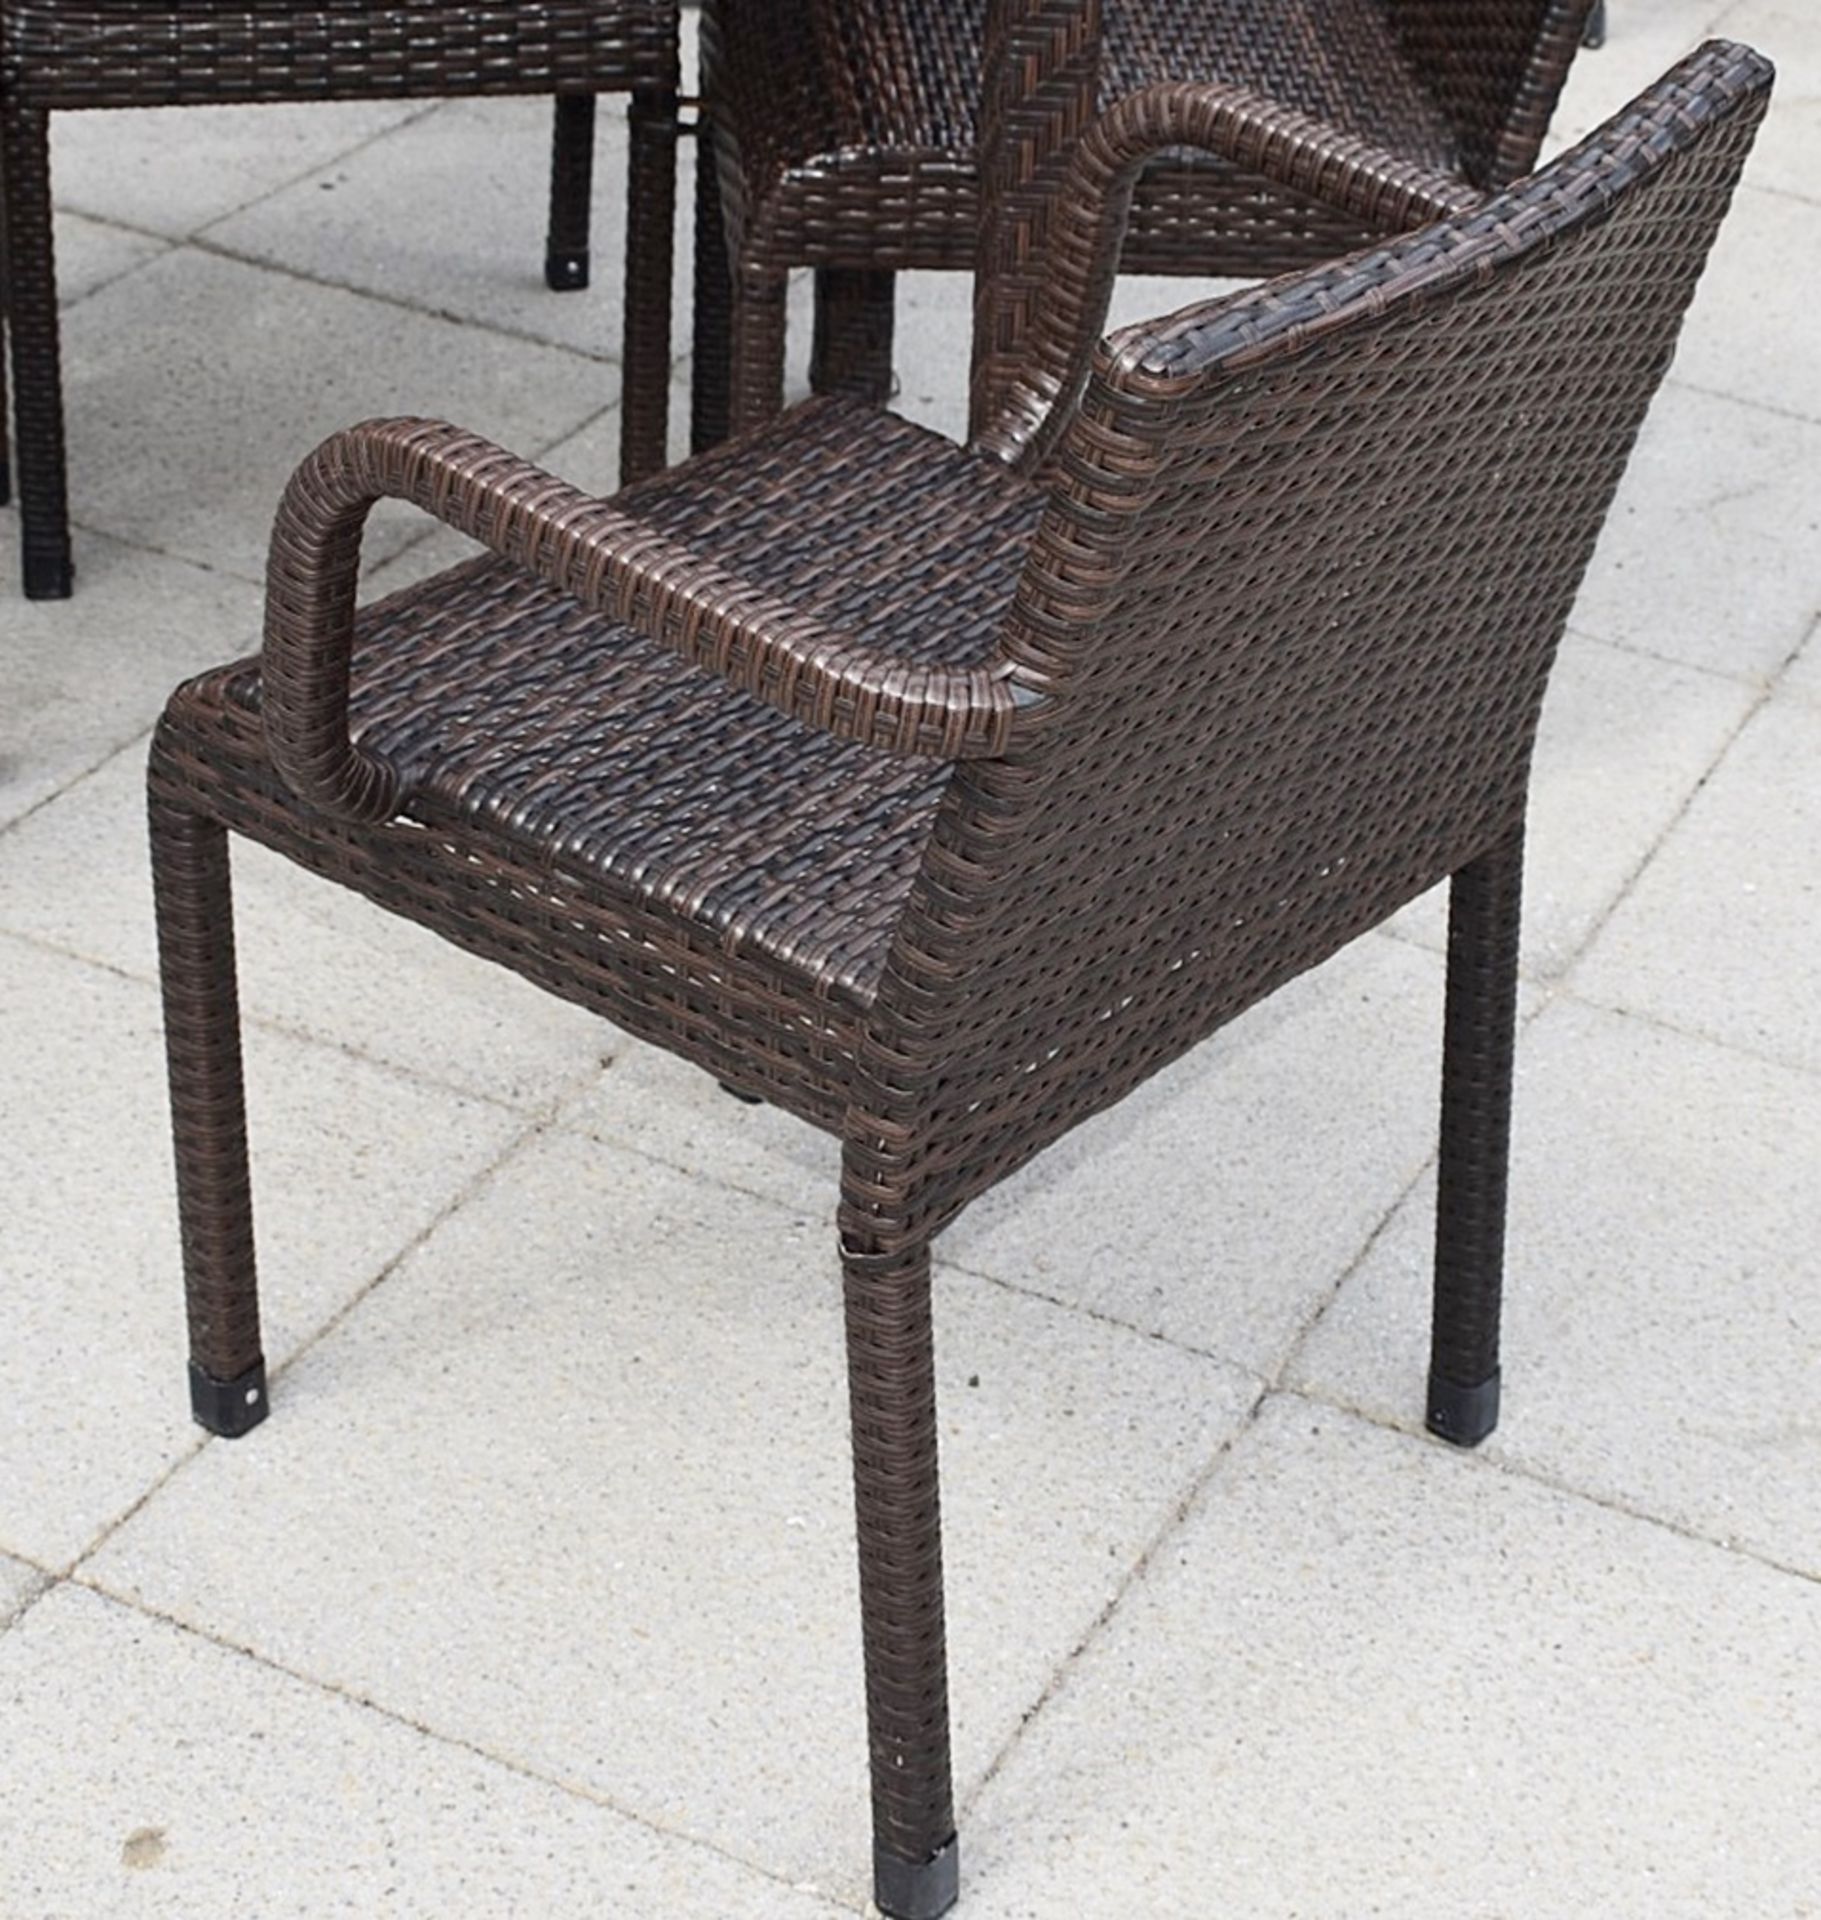 12 x Outdoor Rattan Garden Chairs With 4 Matching Square Tables - Ref: CB OS - CL420 - From a - Image 4 of 4